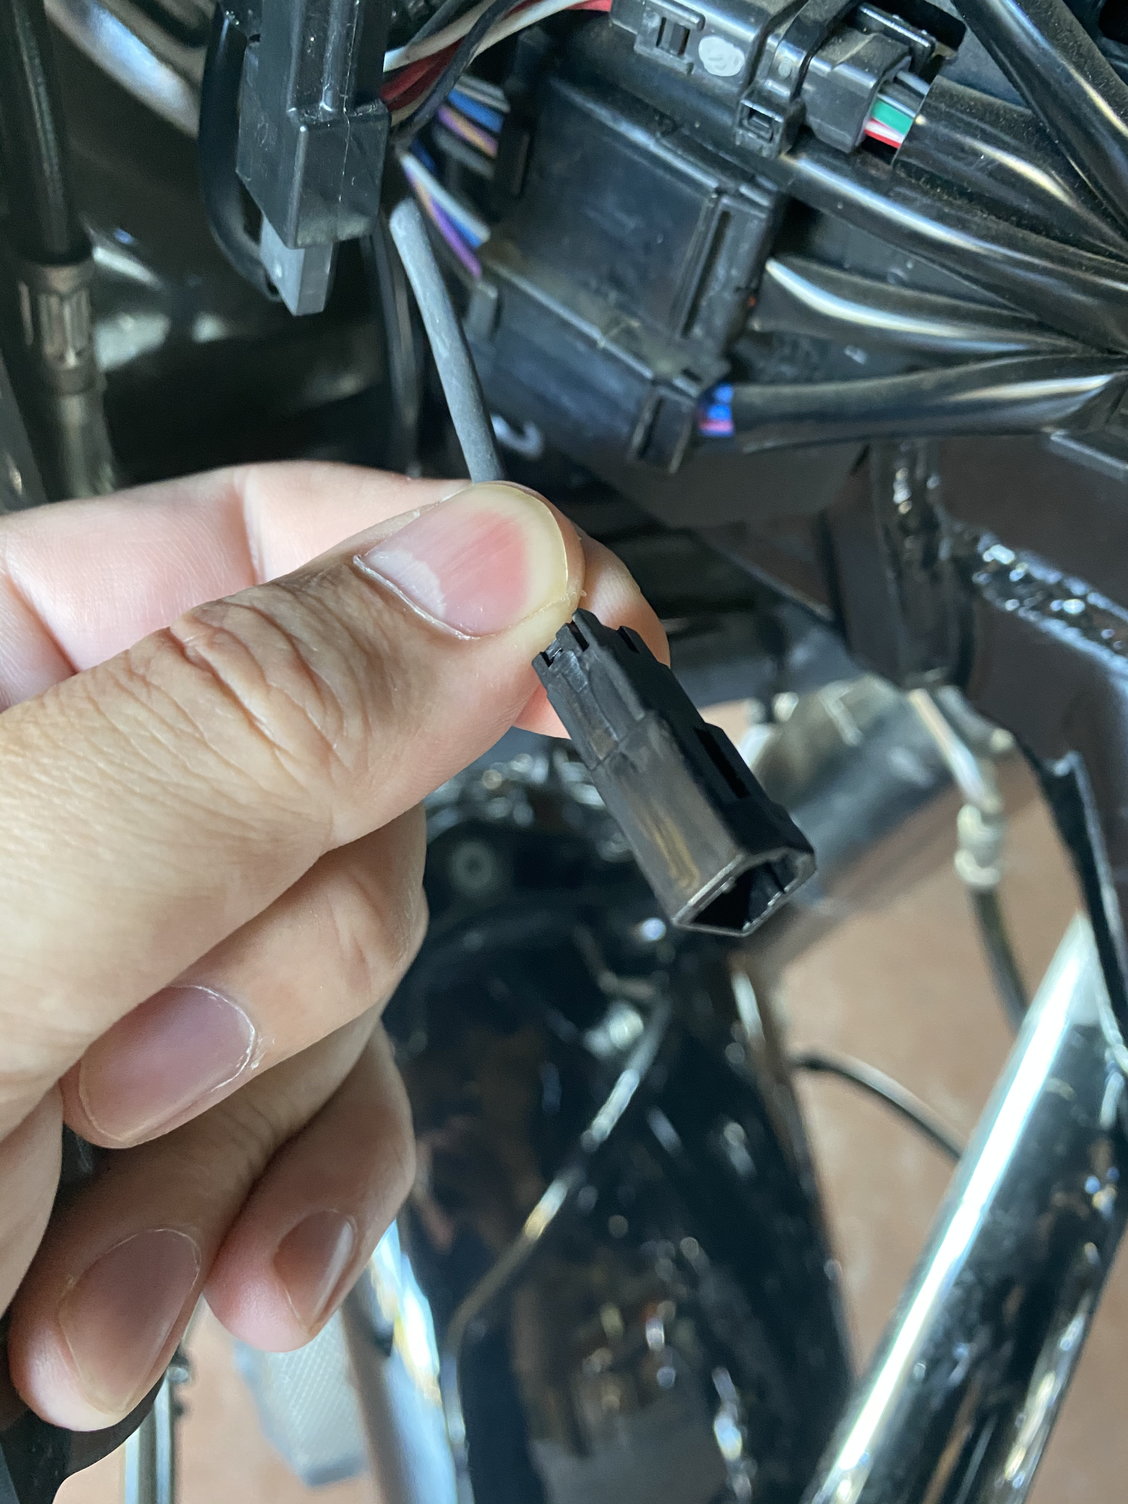 harley molex connector disassembly